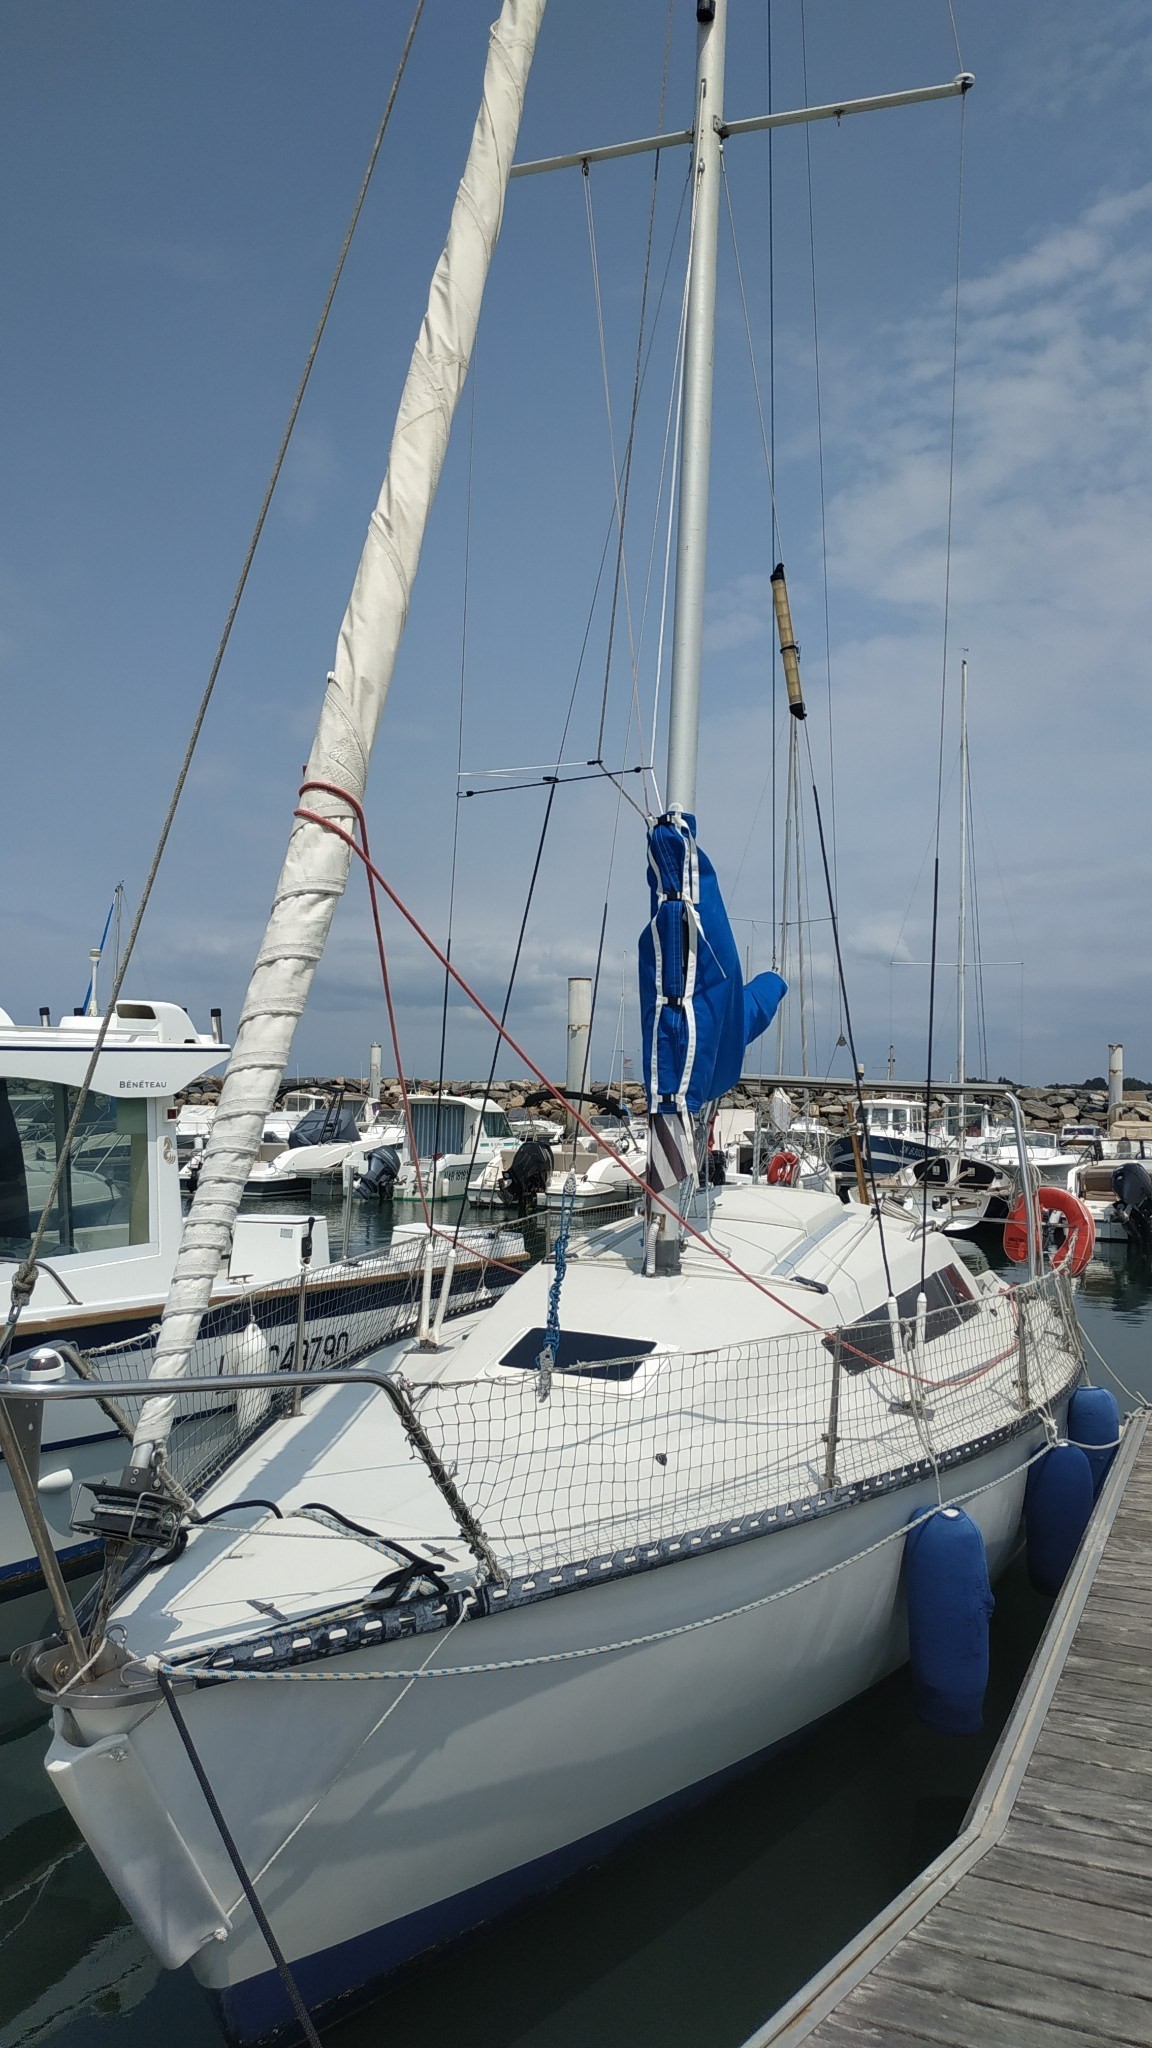 slider 2 Yachting France Jouet 760